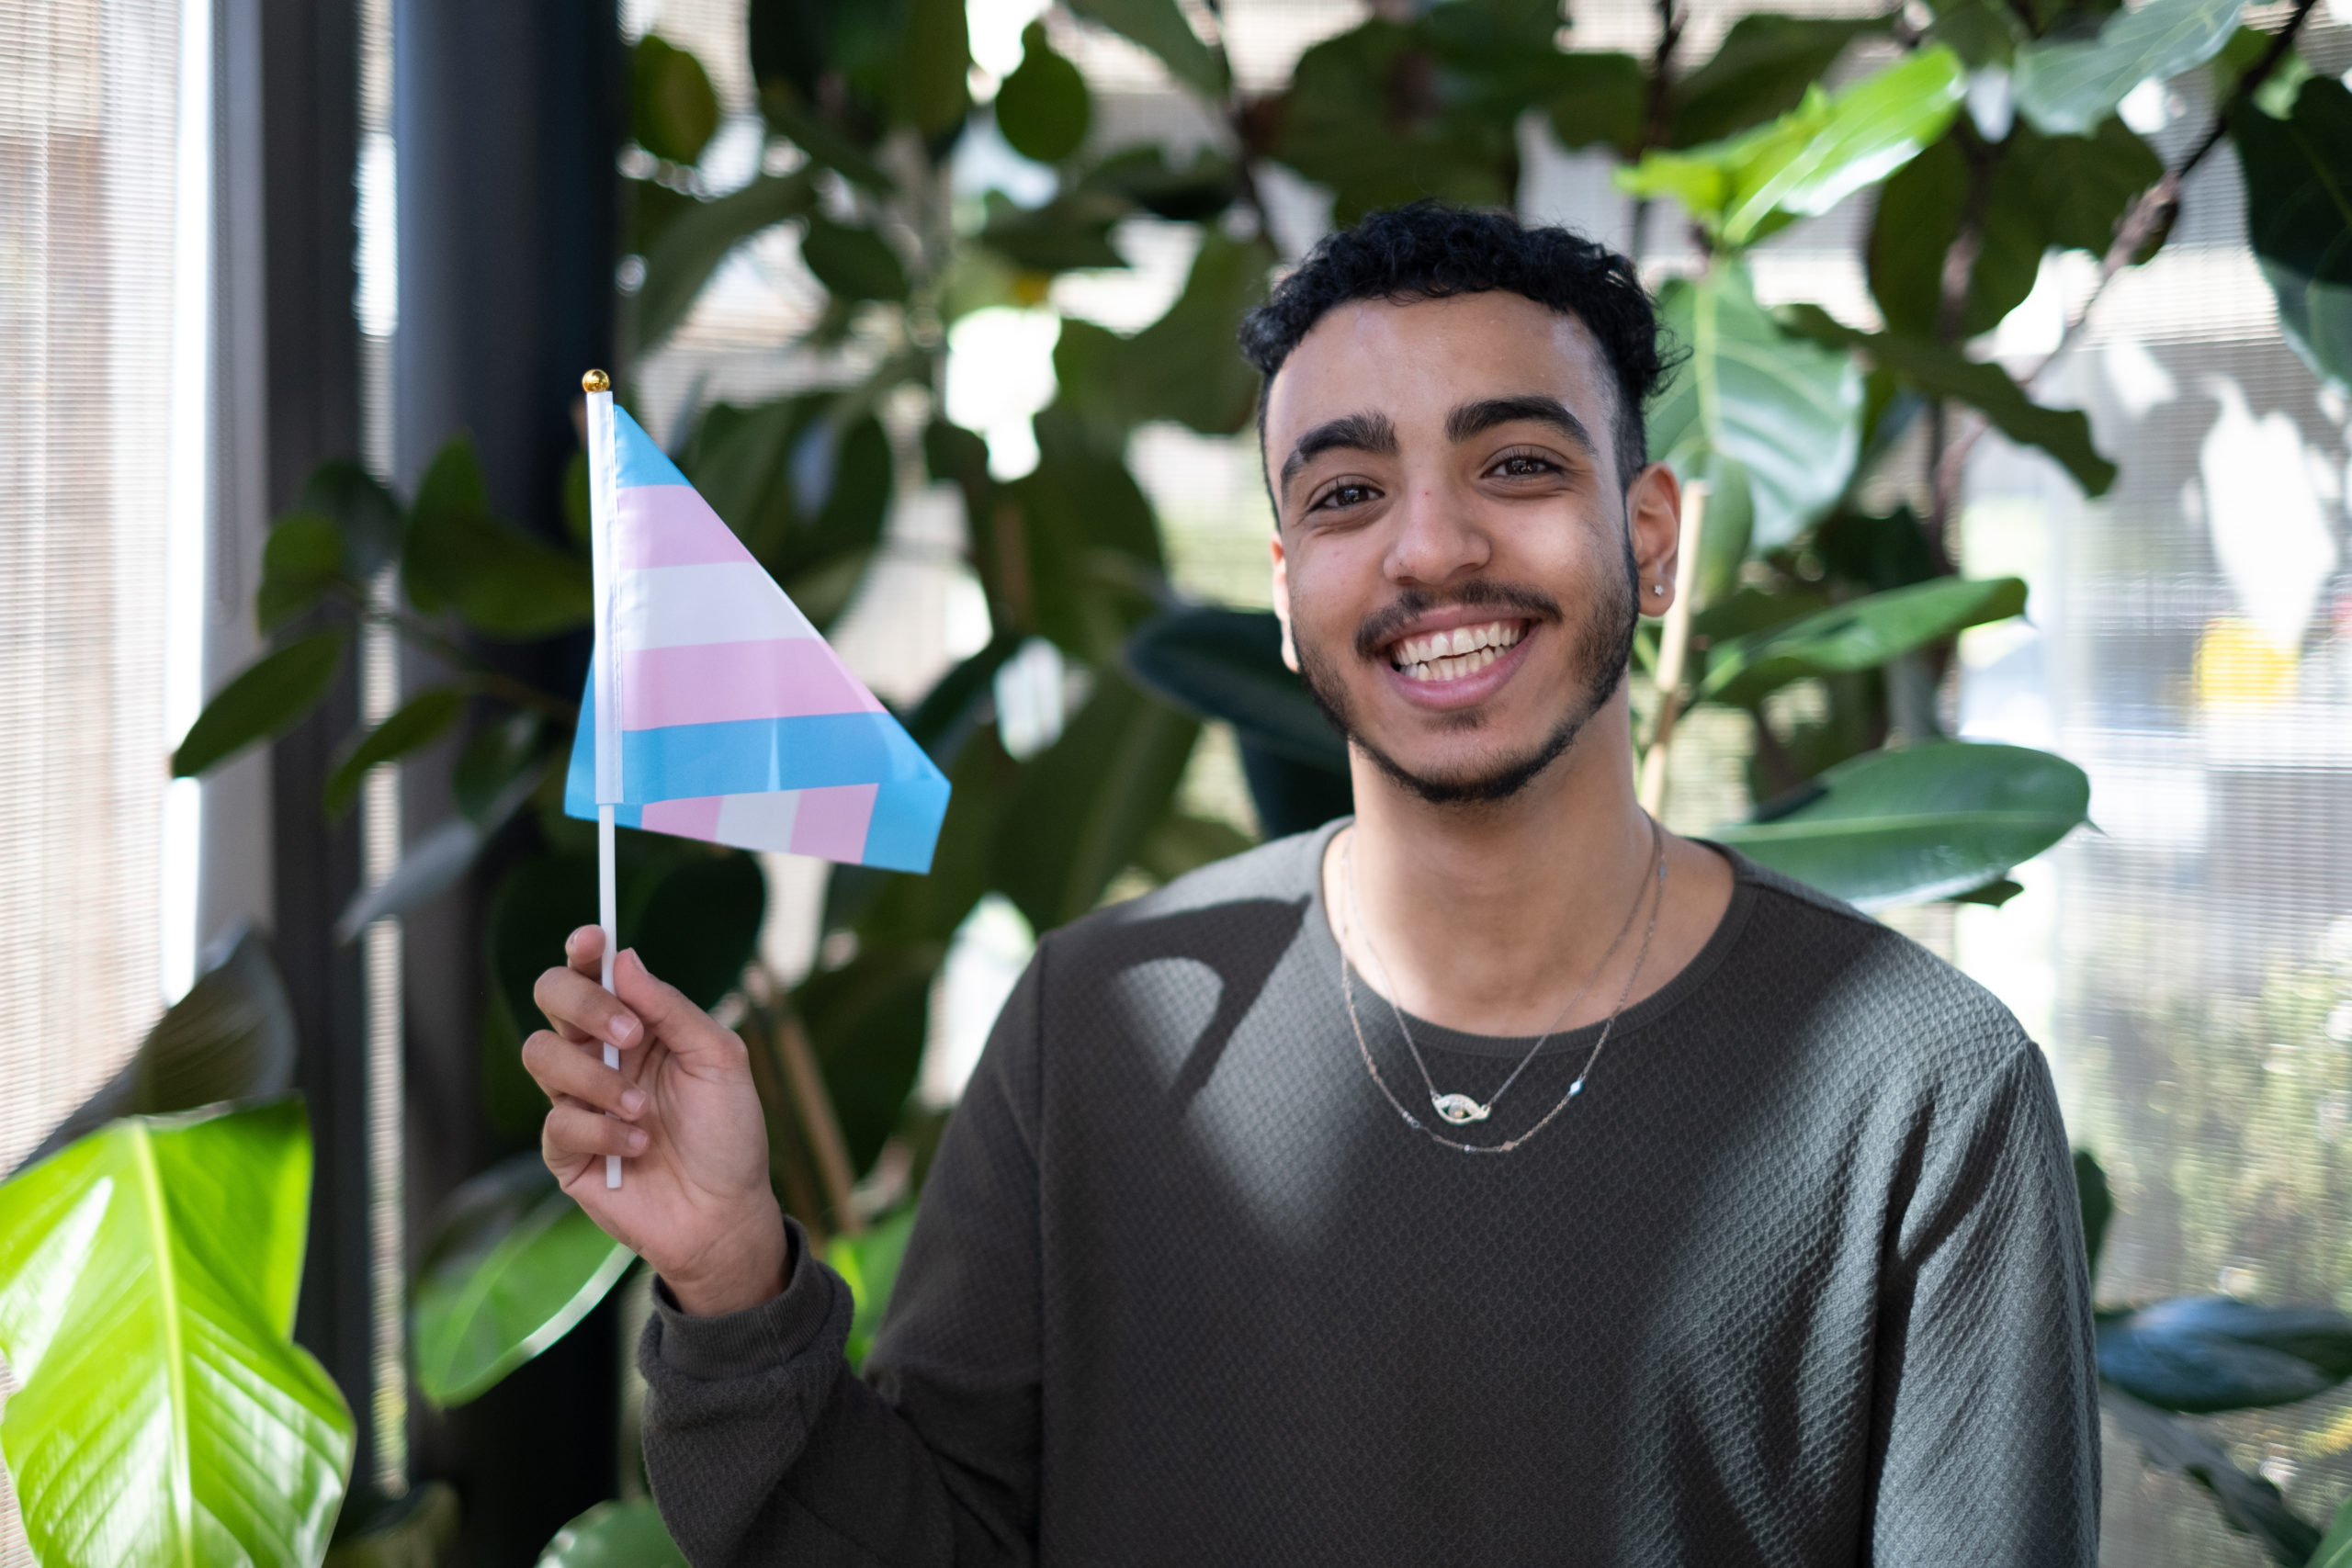 A Just Like Us volunteer holding a trans Pride flag